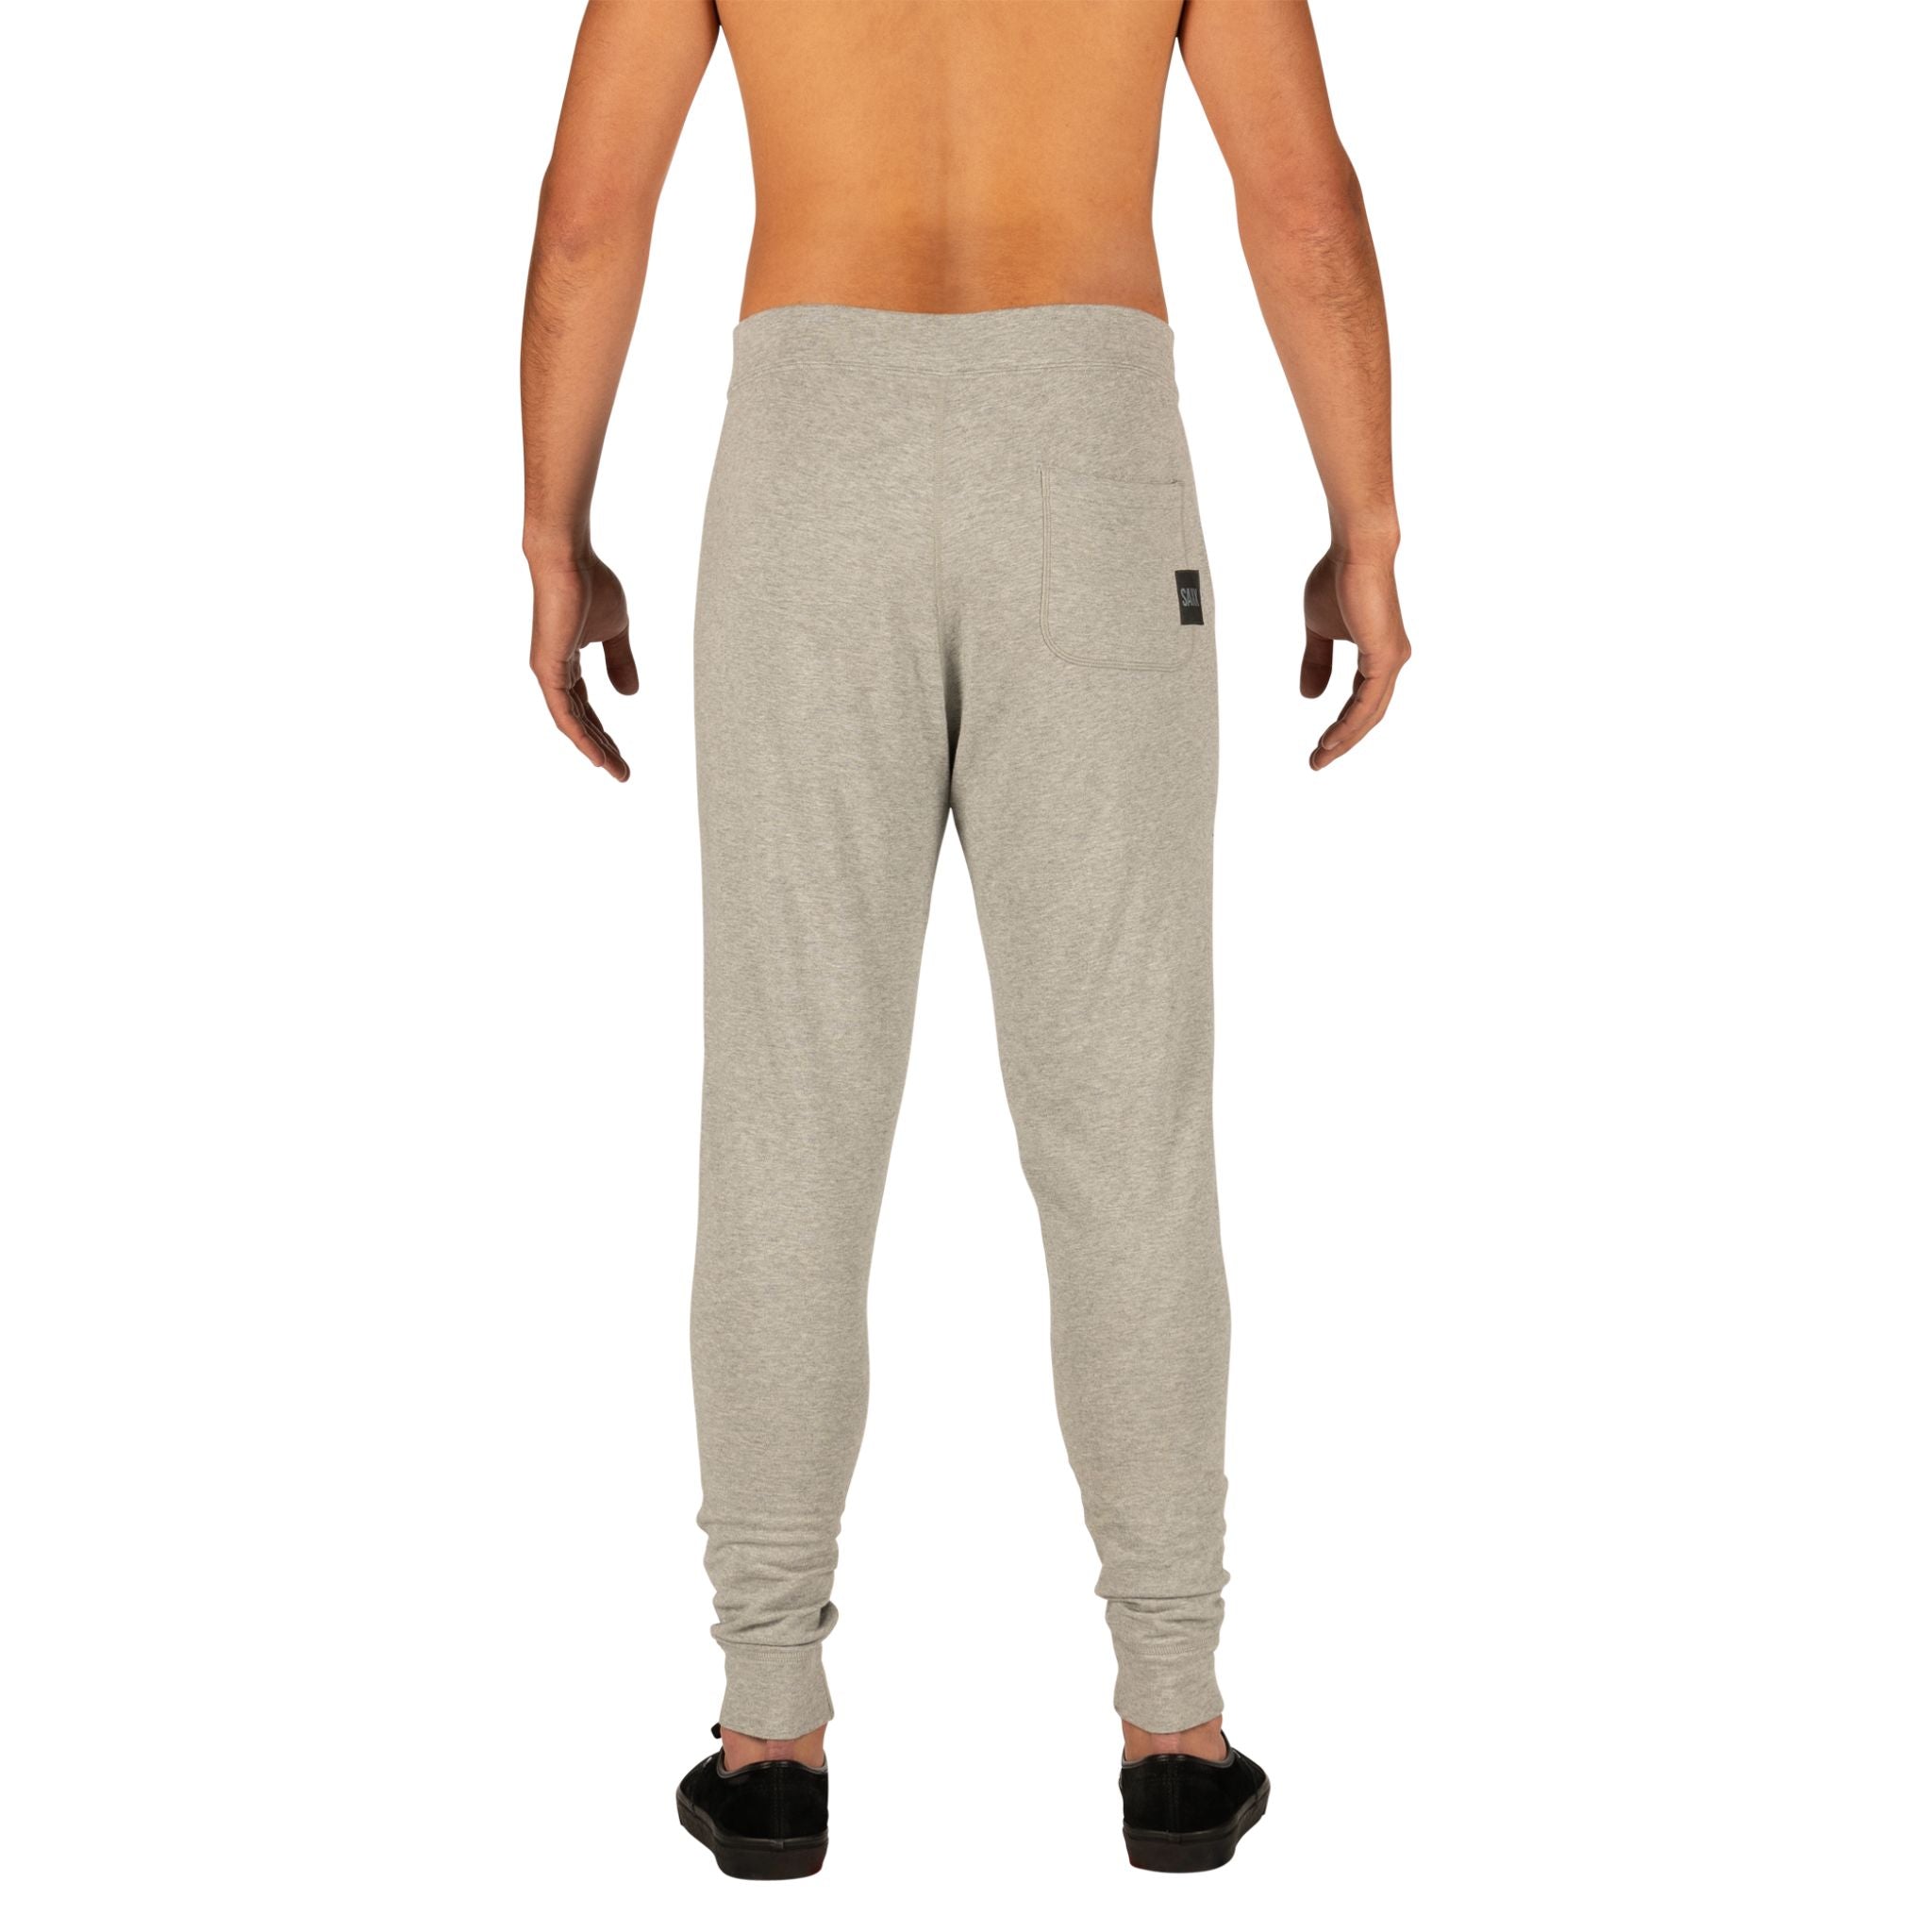 Blending the super-soft hand-feel of premium Modal with the grab-and-go versatility of cotton, SAXX have created a lounge pant like you wouldn’t believe. 3Six Five is here to keep you comfortable no matter what, whether that means going full Netflix binge-mode or taking care of some quick errands outside the house. Featuring non-chafing Flat Out Seams™ for additional comfort, this legendary collection is built for the whole weekend and beyond.